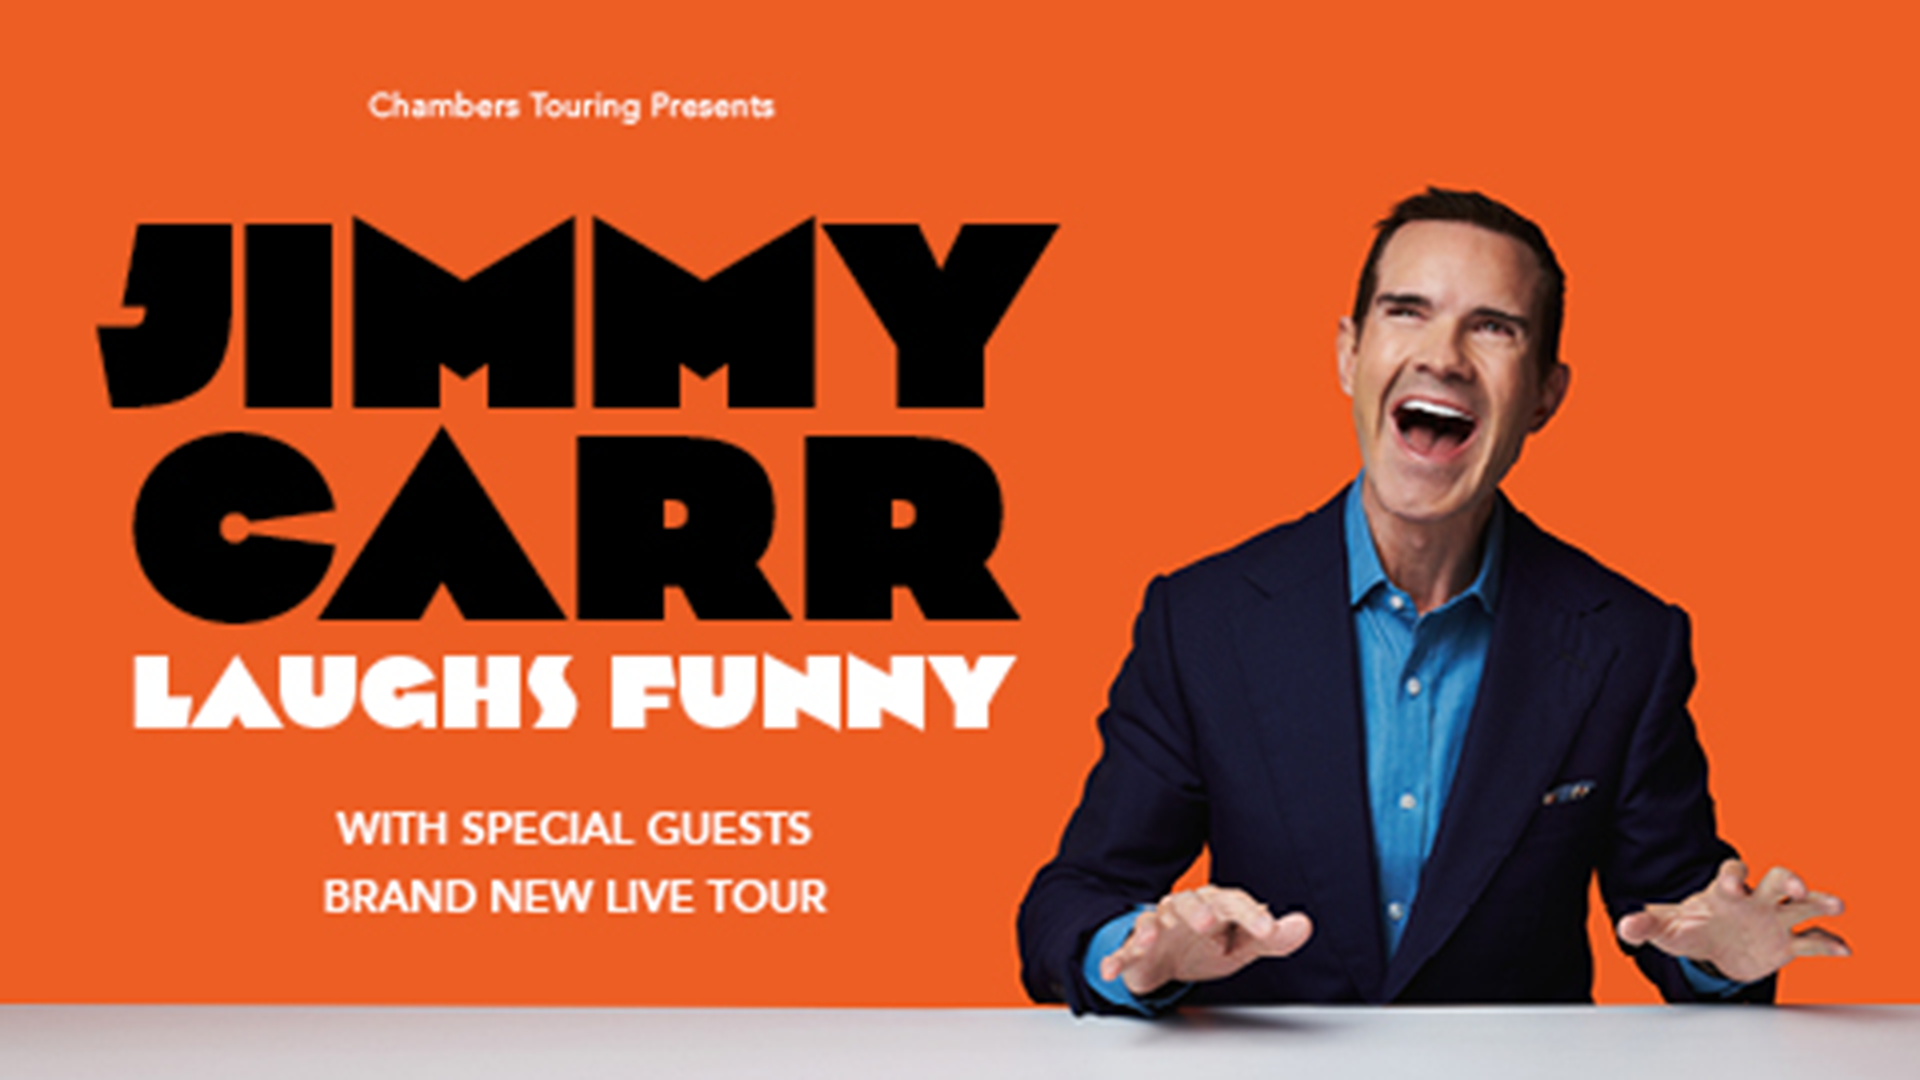 Jimmy Carr: Laughs Funny (Bournemouth)